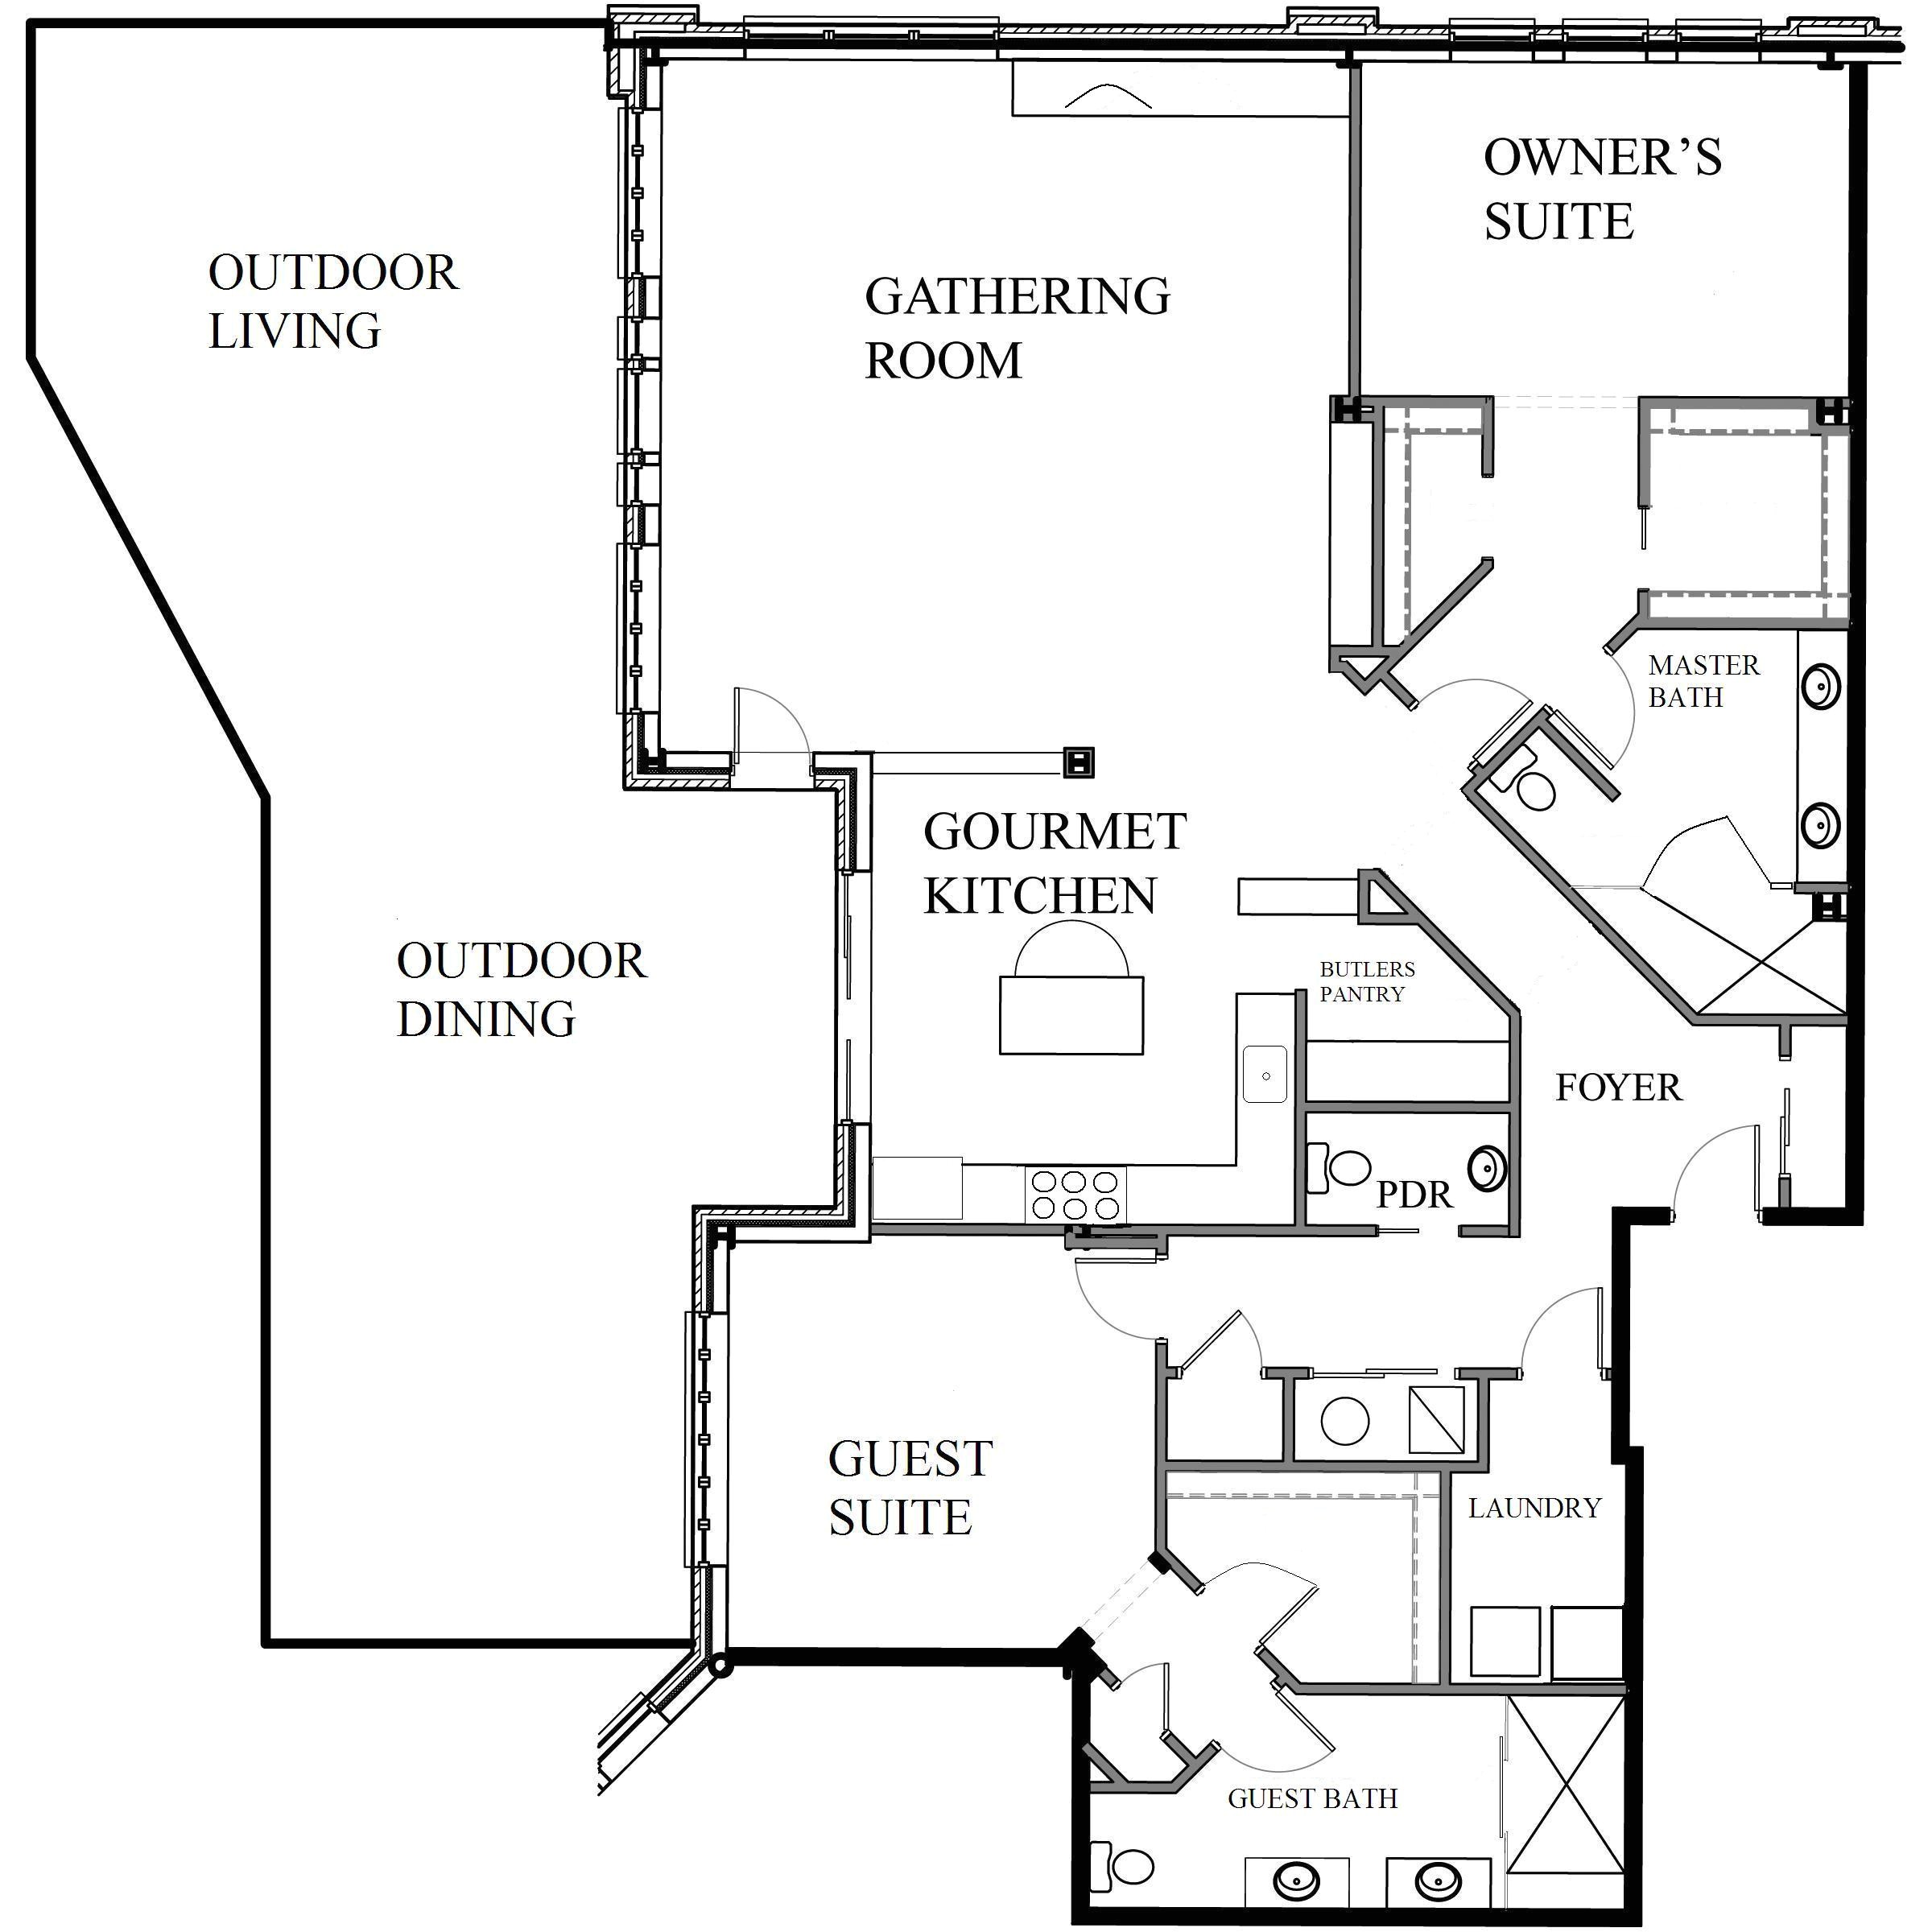 Funeral Home Floor Plan Layout Funeral Home Floor Plan Layout Homes Floor Plans